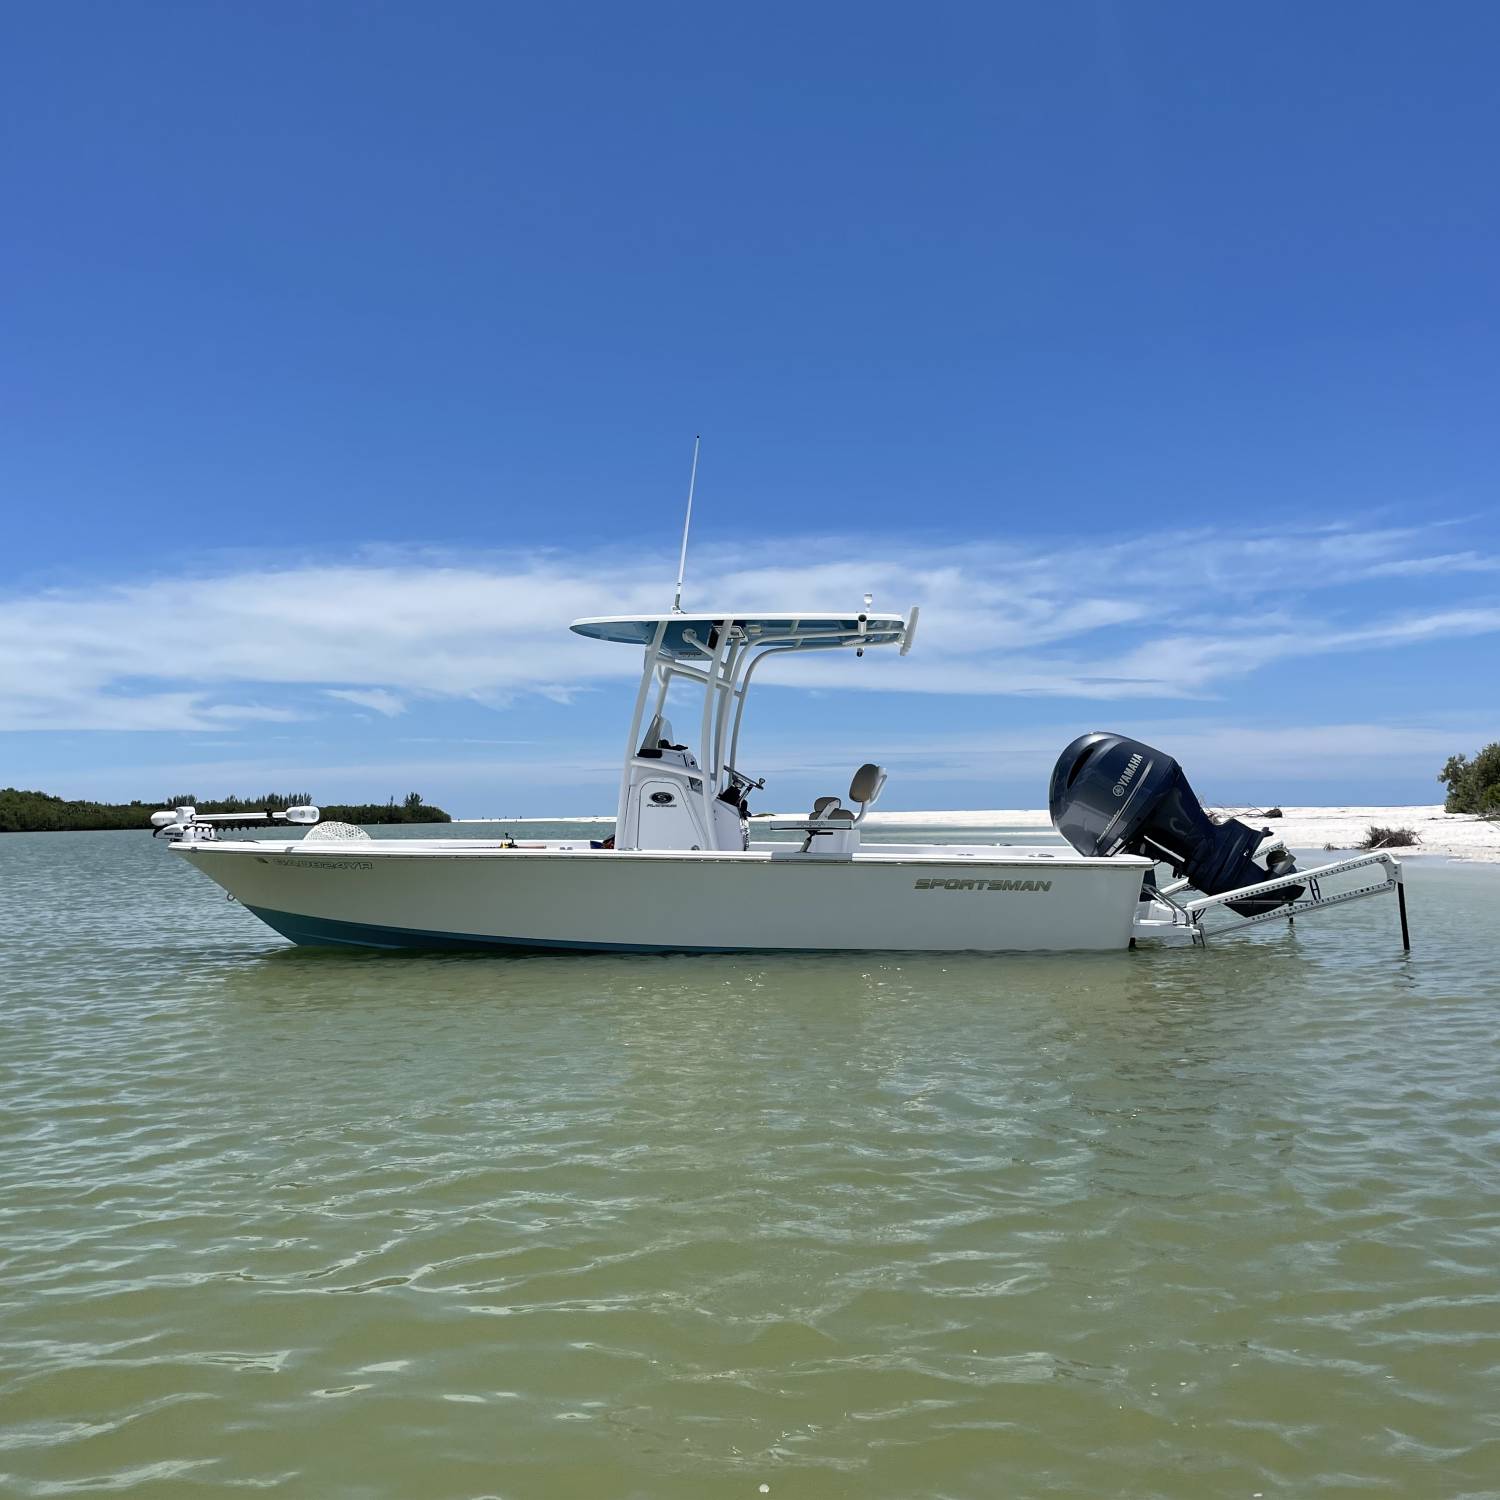 Title: Holmes Sportsman - On board their Sportsman Masters 227 Bay Boat - Location: Marco Island Florida. Participating in the Photo Contest #SportsmanJune